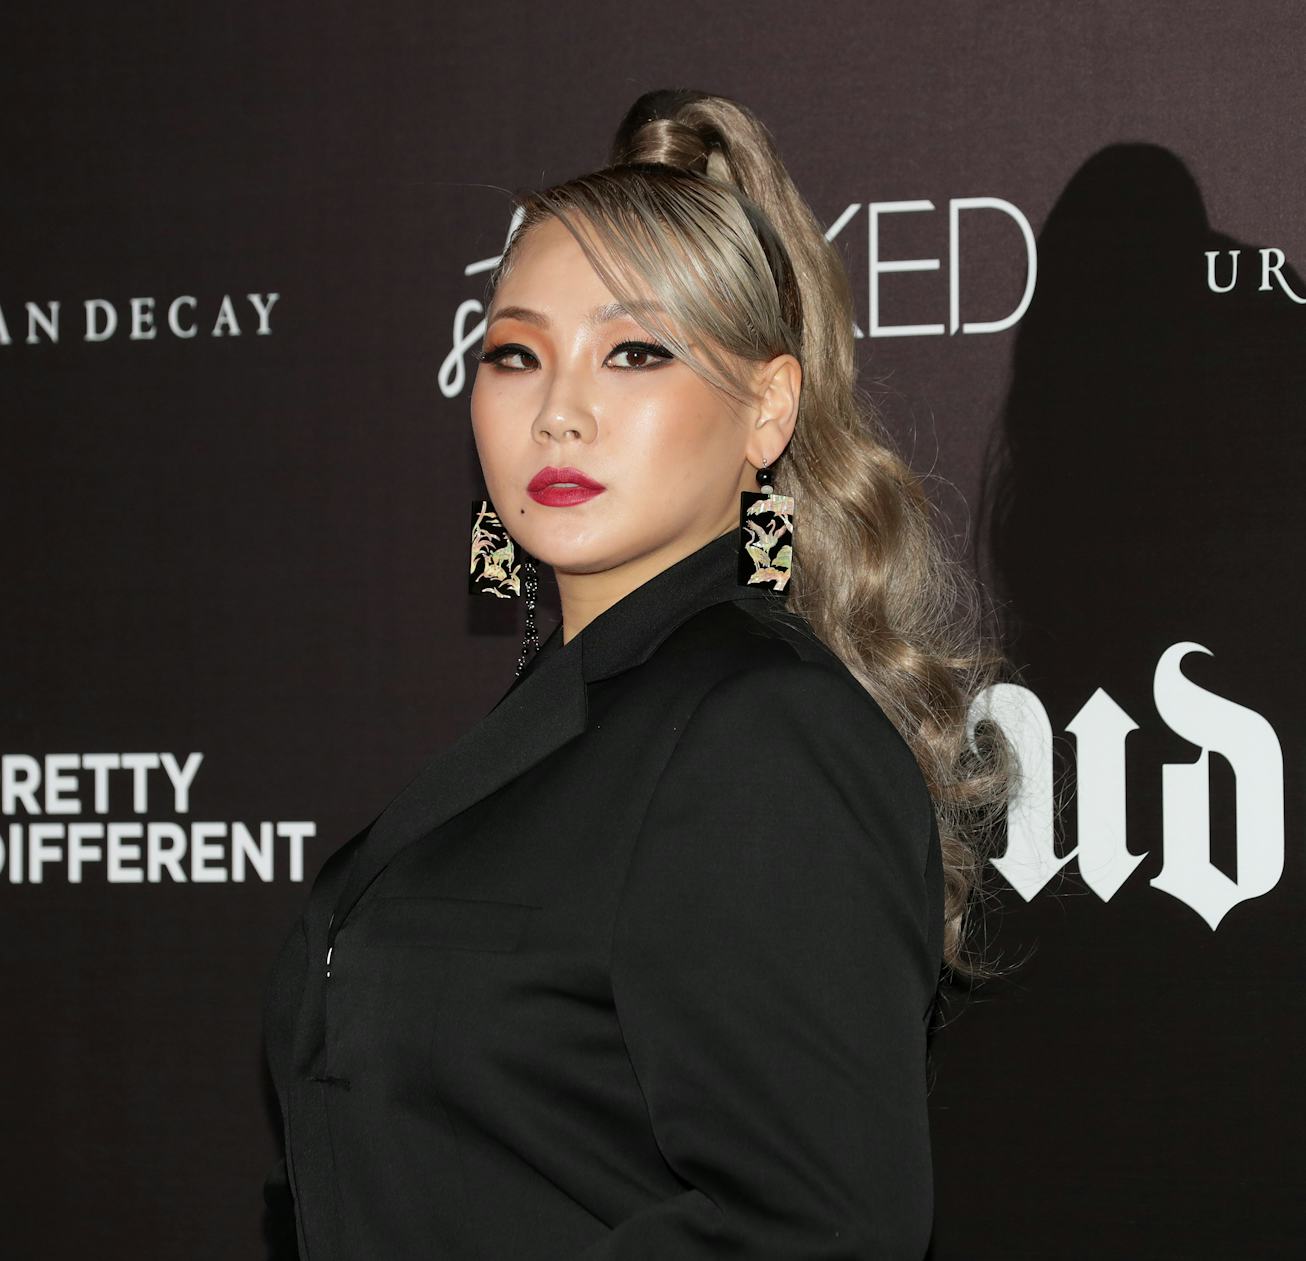 CL is one of many K-pop stars who have spoken out against anti-Asian hate in the United States and w...